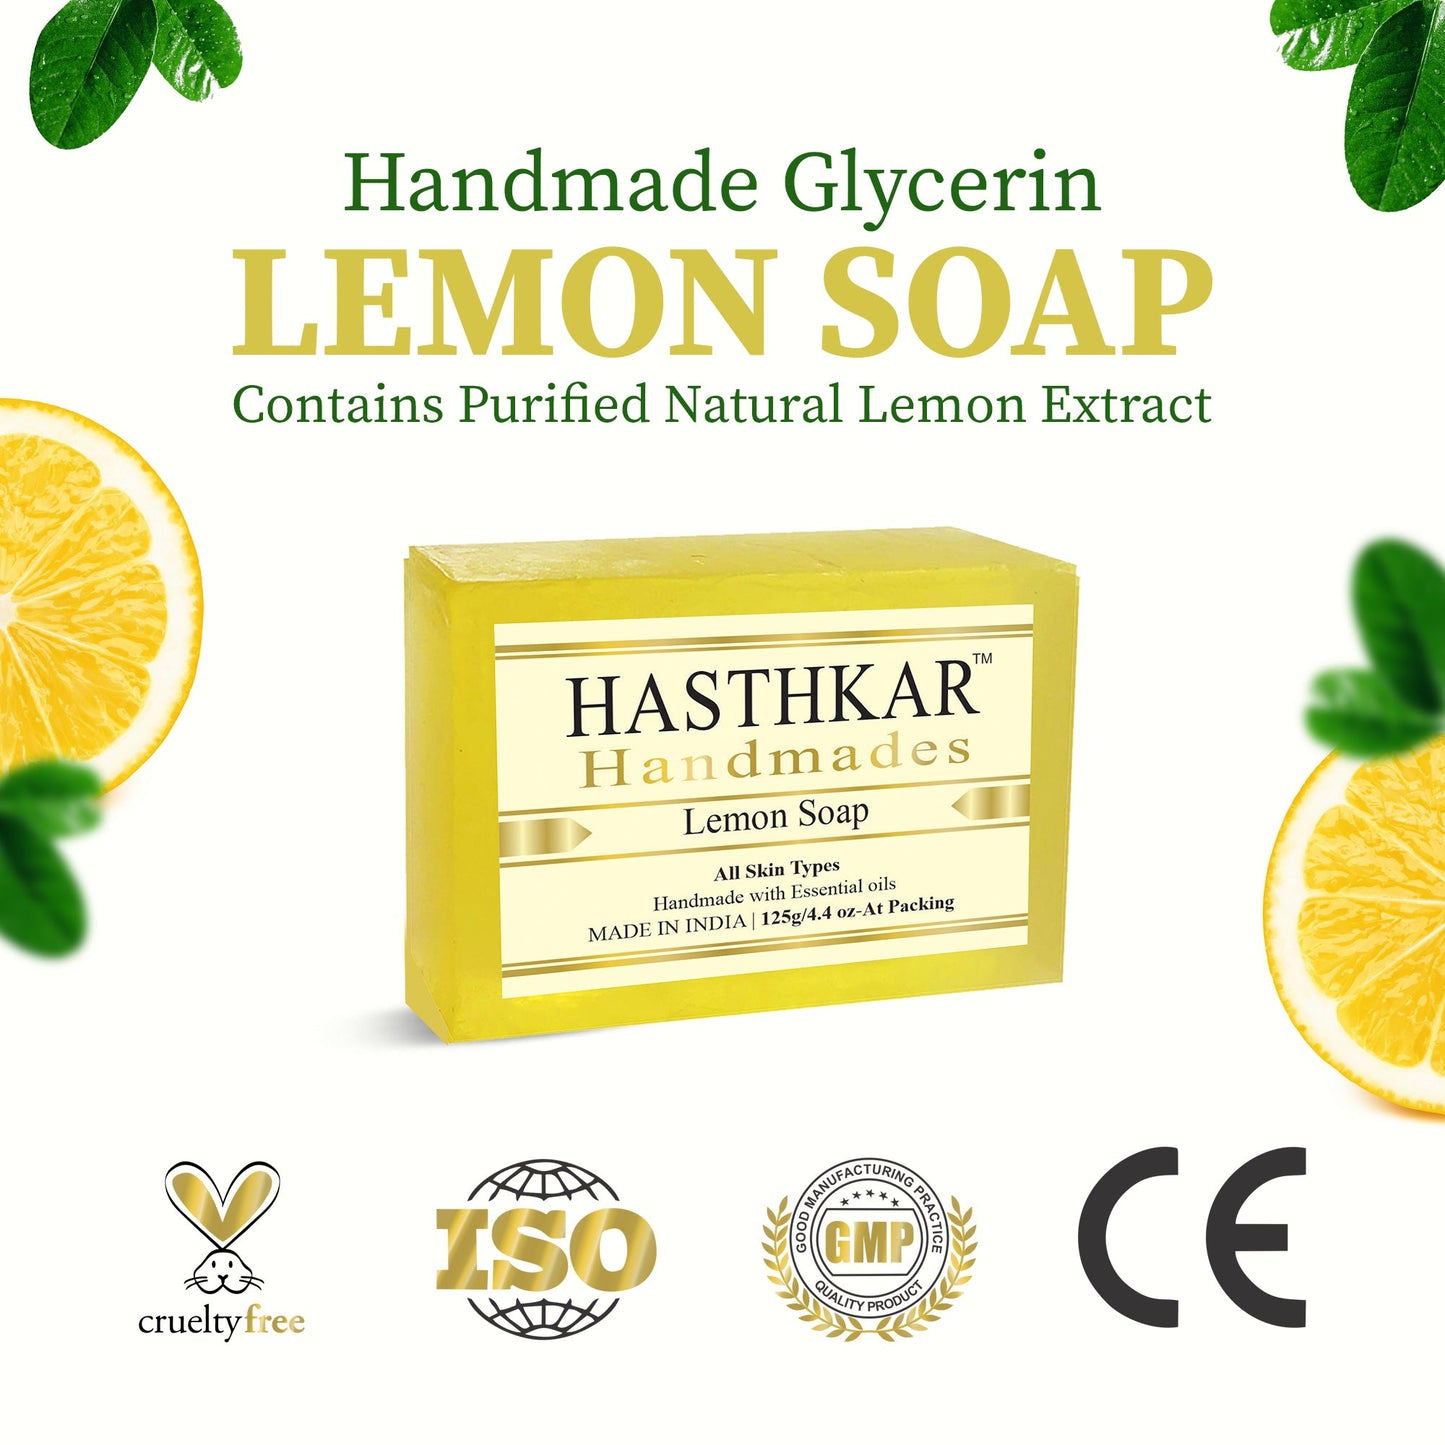 Hasthkar Handmades Glycerine Lemon Soap For Antibacterial | Ant | Acne And Pimples And Keep The Skin Healthy And Soft | Remove Oil Buildup | Tighten Up Saggy Skin | And Prevent Acne Breakouts - 125Gm